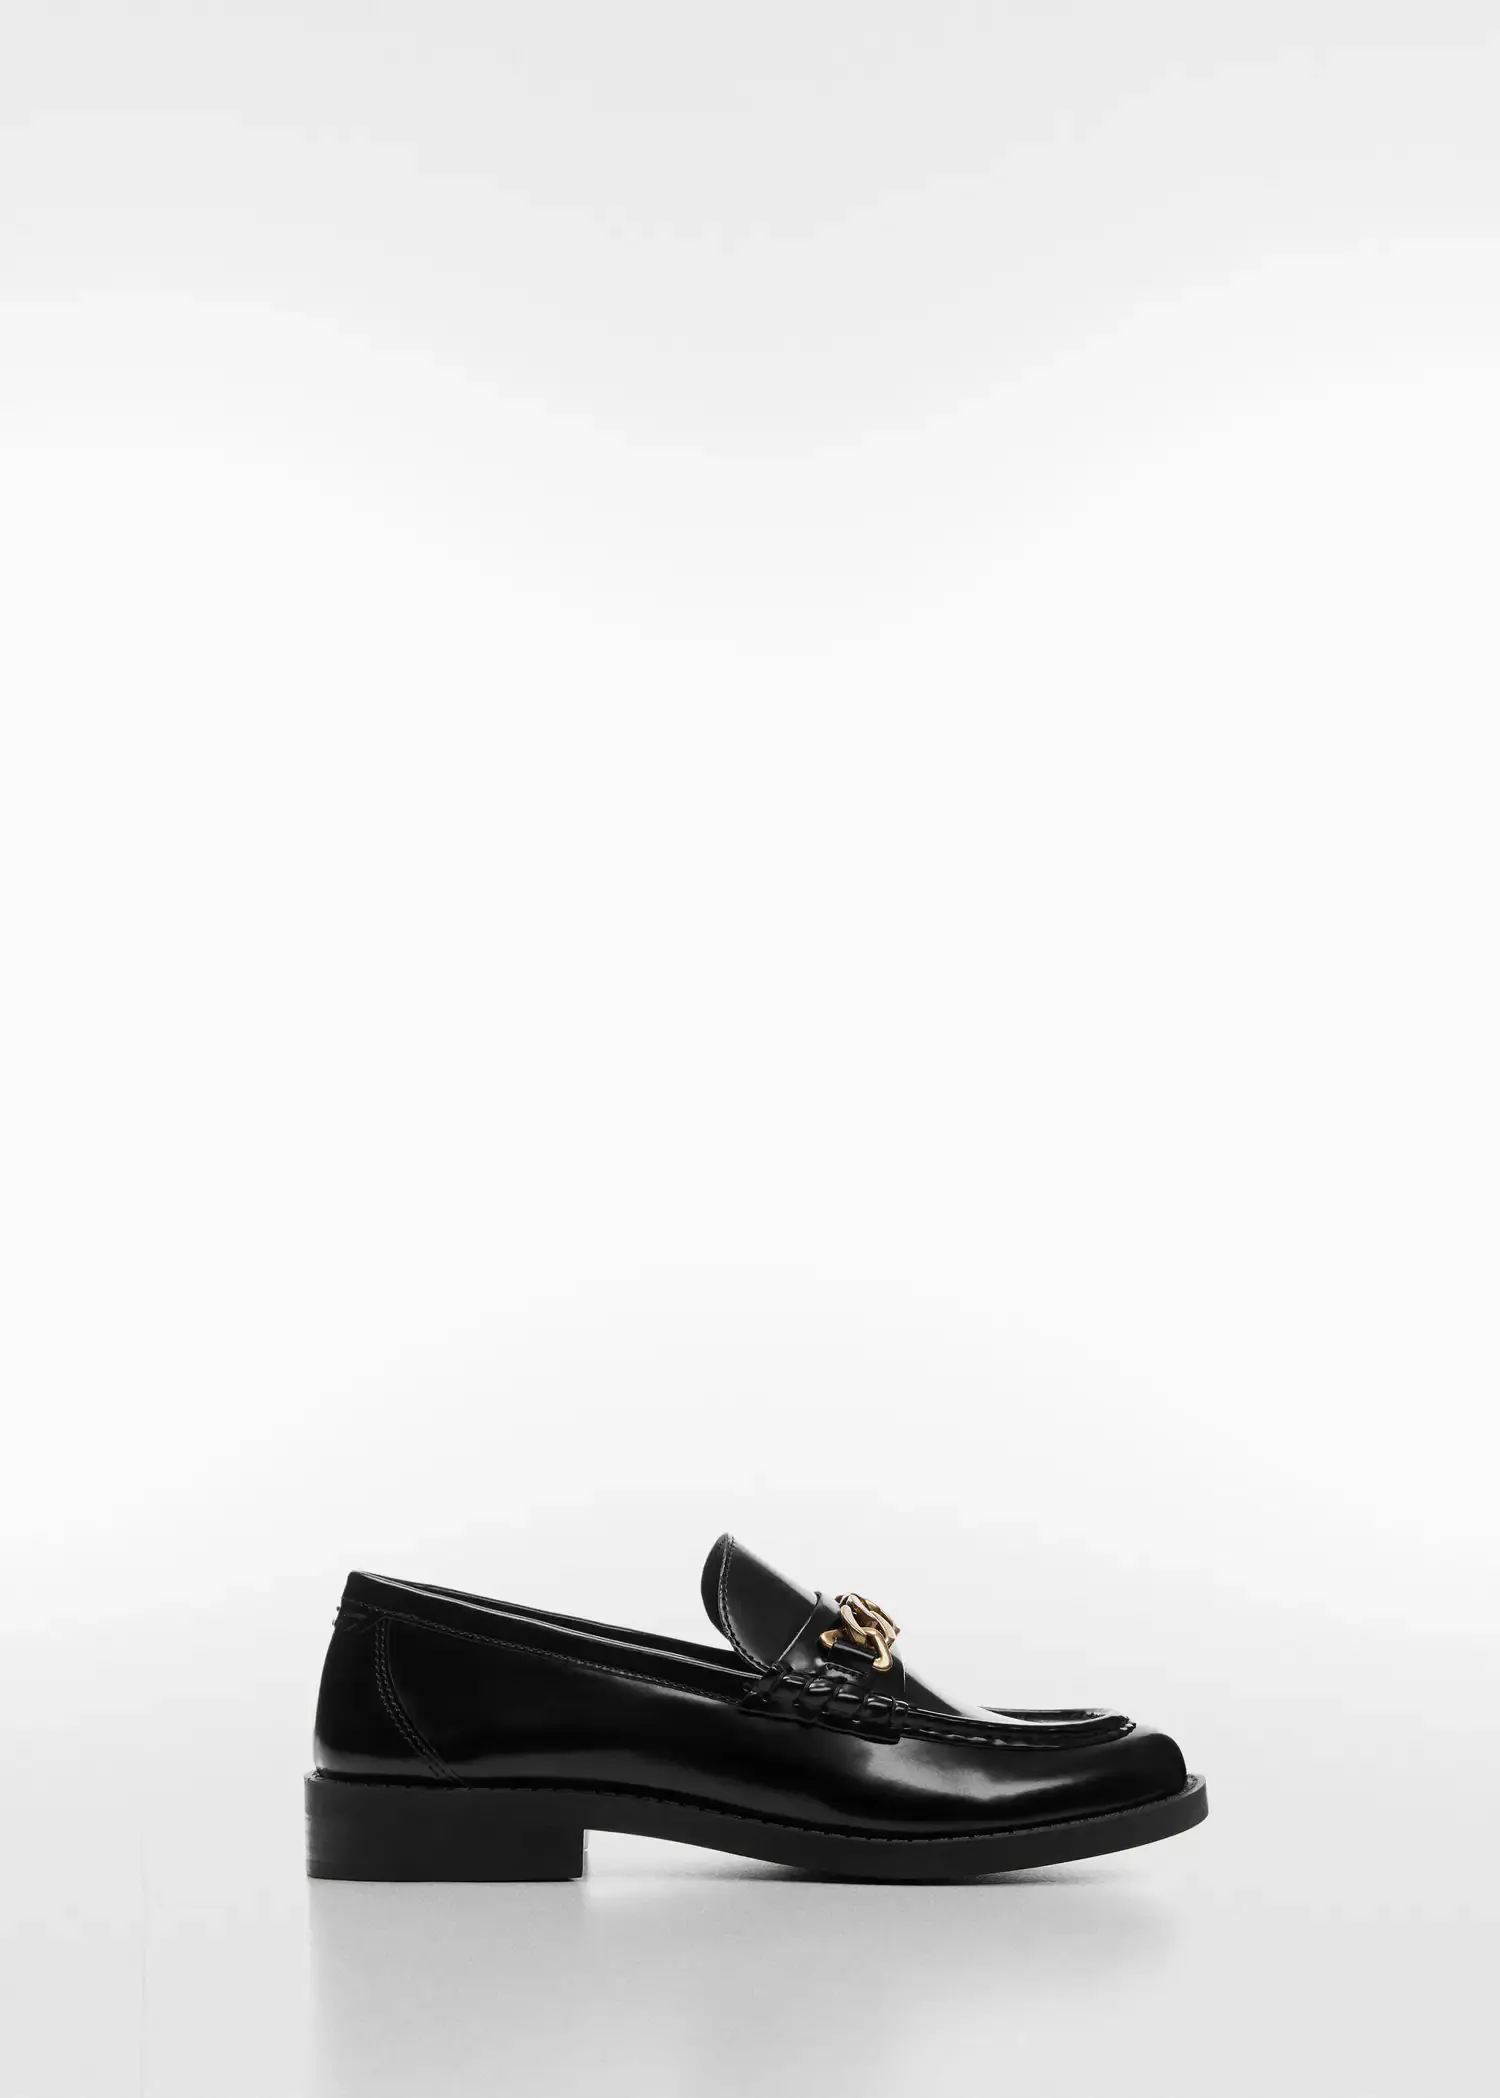 Mango Chain loafers. 3